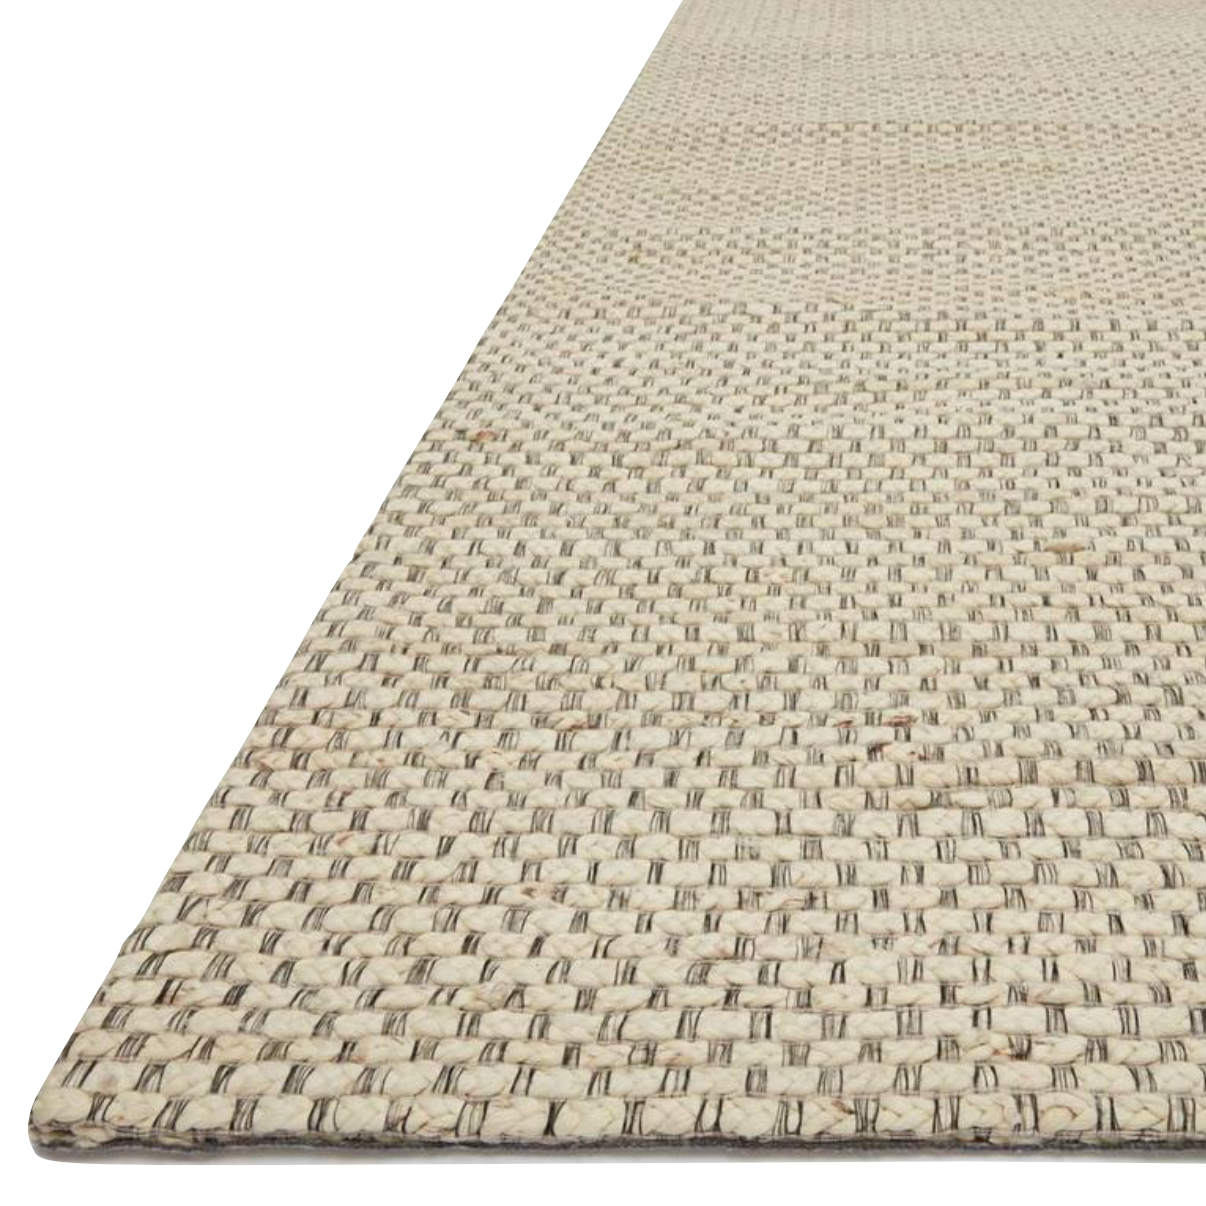 The Lily Ivory Area Rug is an earthy base that isn't your average jute area rug. The hand-woven collection has an intricate yet subtle textural look that adds an elevated layer to any style. This area rug would be great for living rooms, dining rooms, or other high-traffic areas.   Hand Woven 97% Jute | 3% Other Fiber LIL-01 Ivory